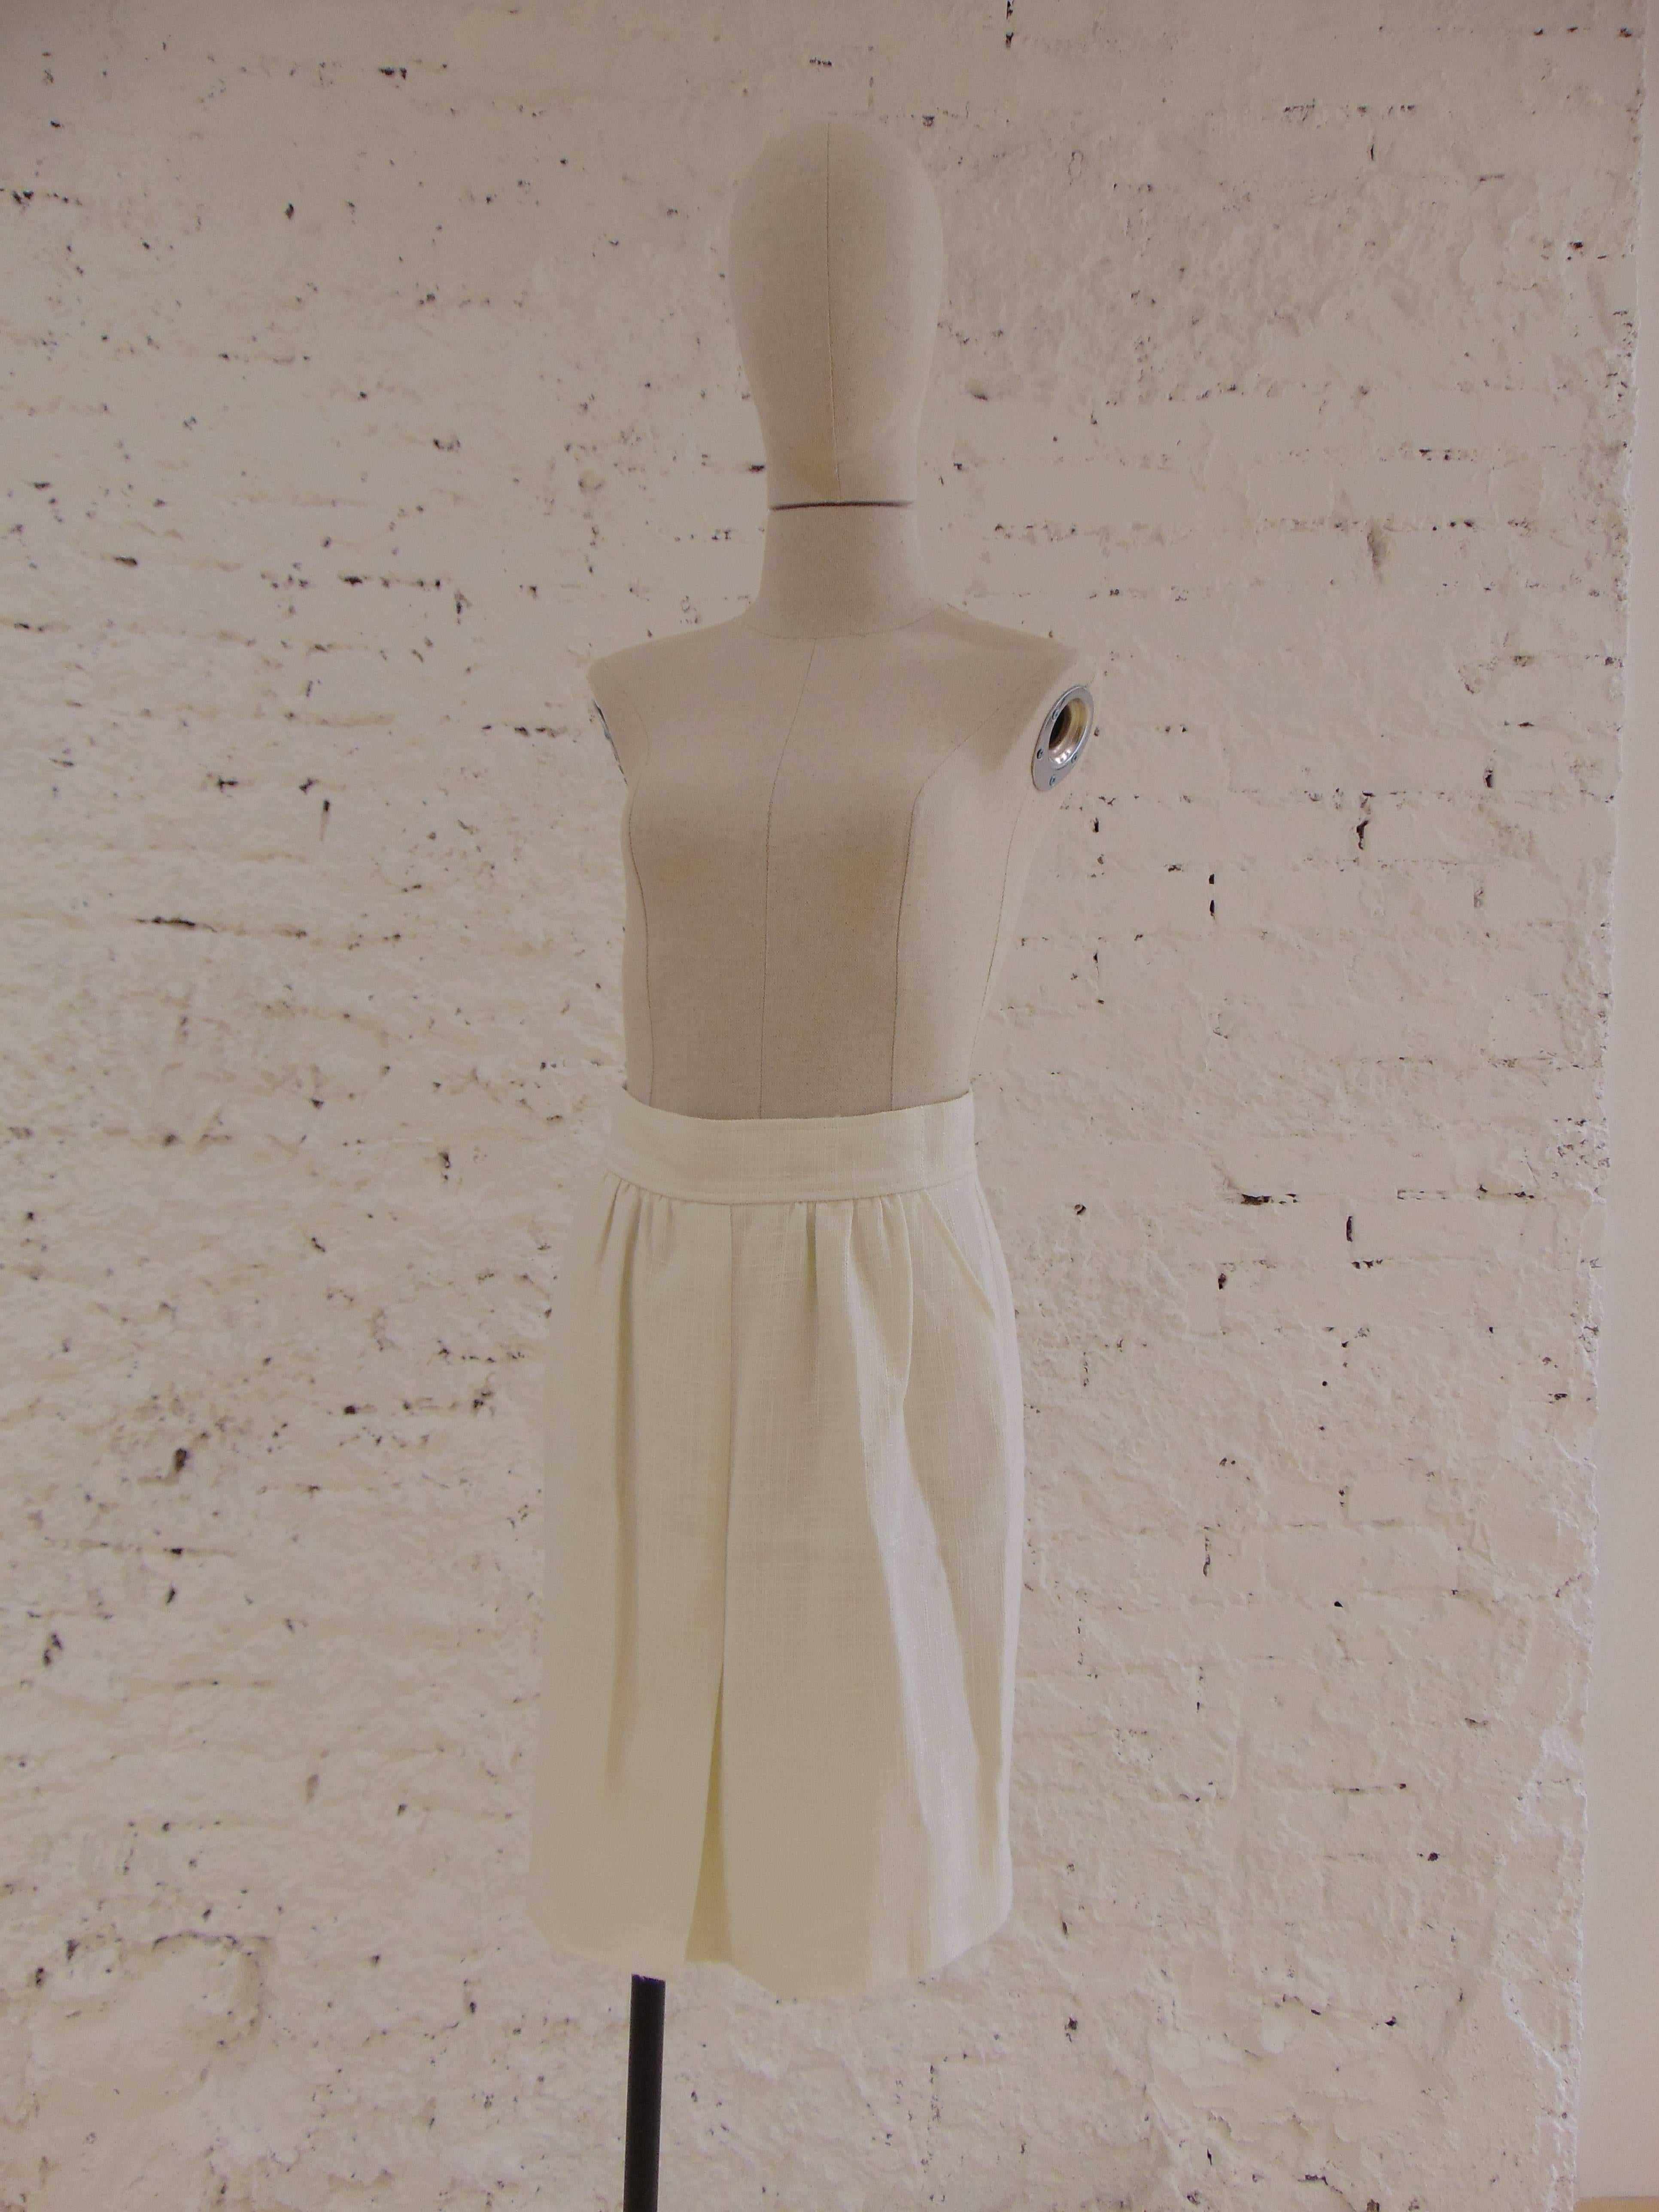 Chanel cream skirt
totally made in france in size 42
composition: Nylon and viscose
lining: Silk